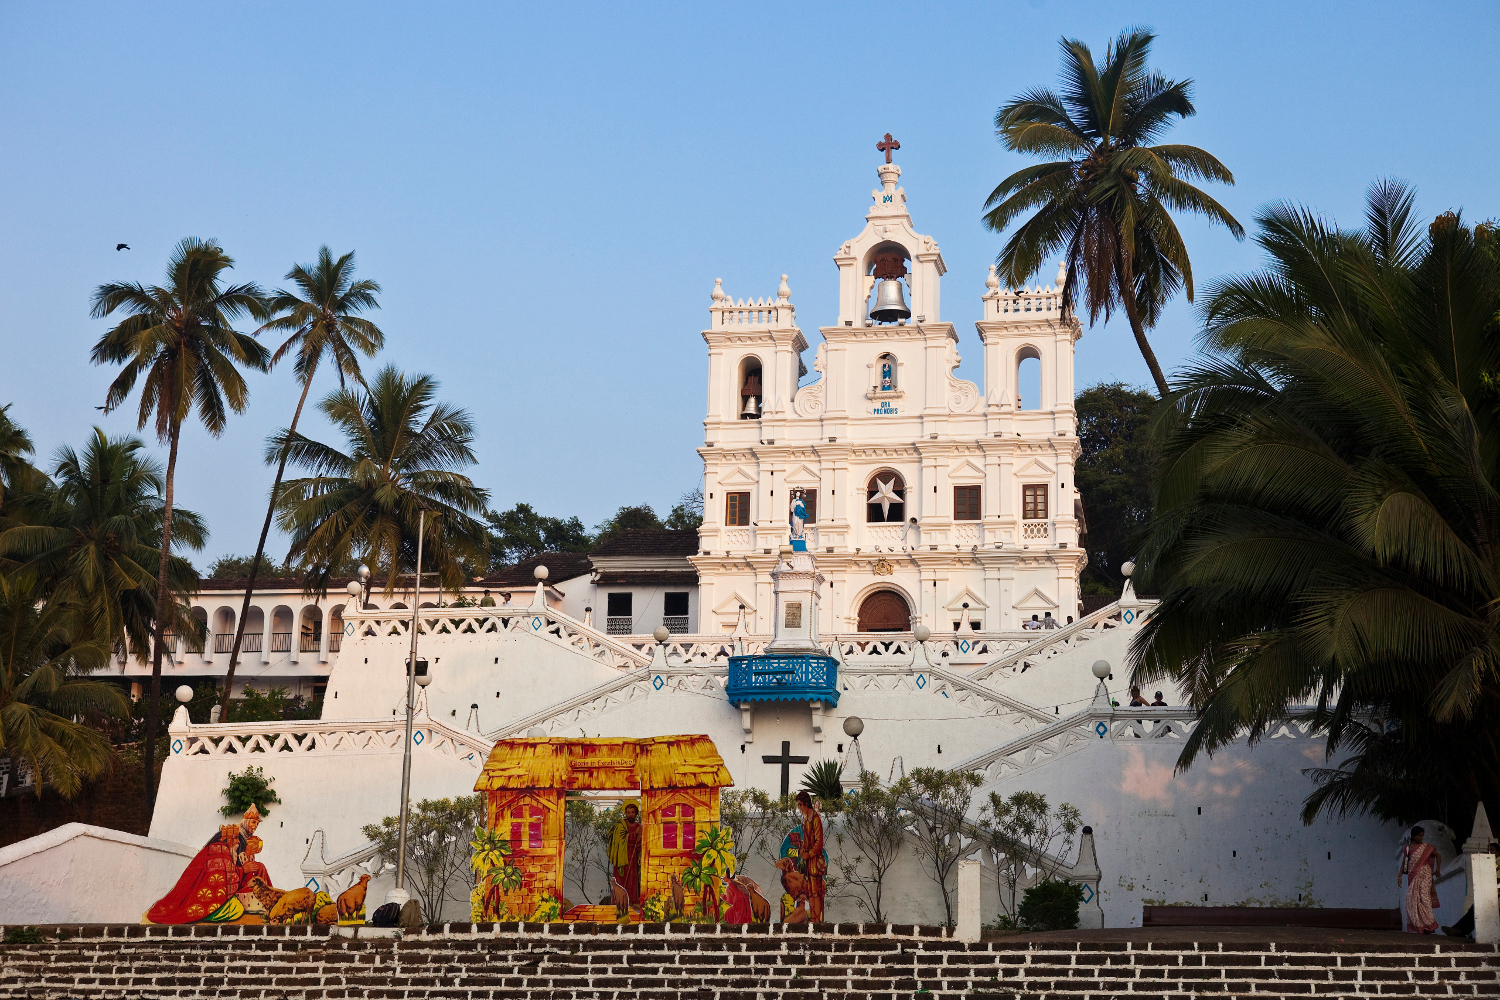 Nativity Scene at the Church of the Immaculate Conception, Old Goa. Image by GARDEL Bertrand / hemis.fr / Getty